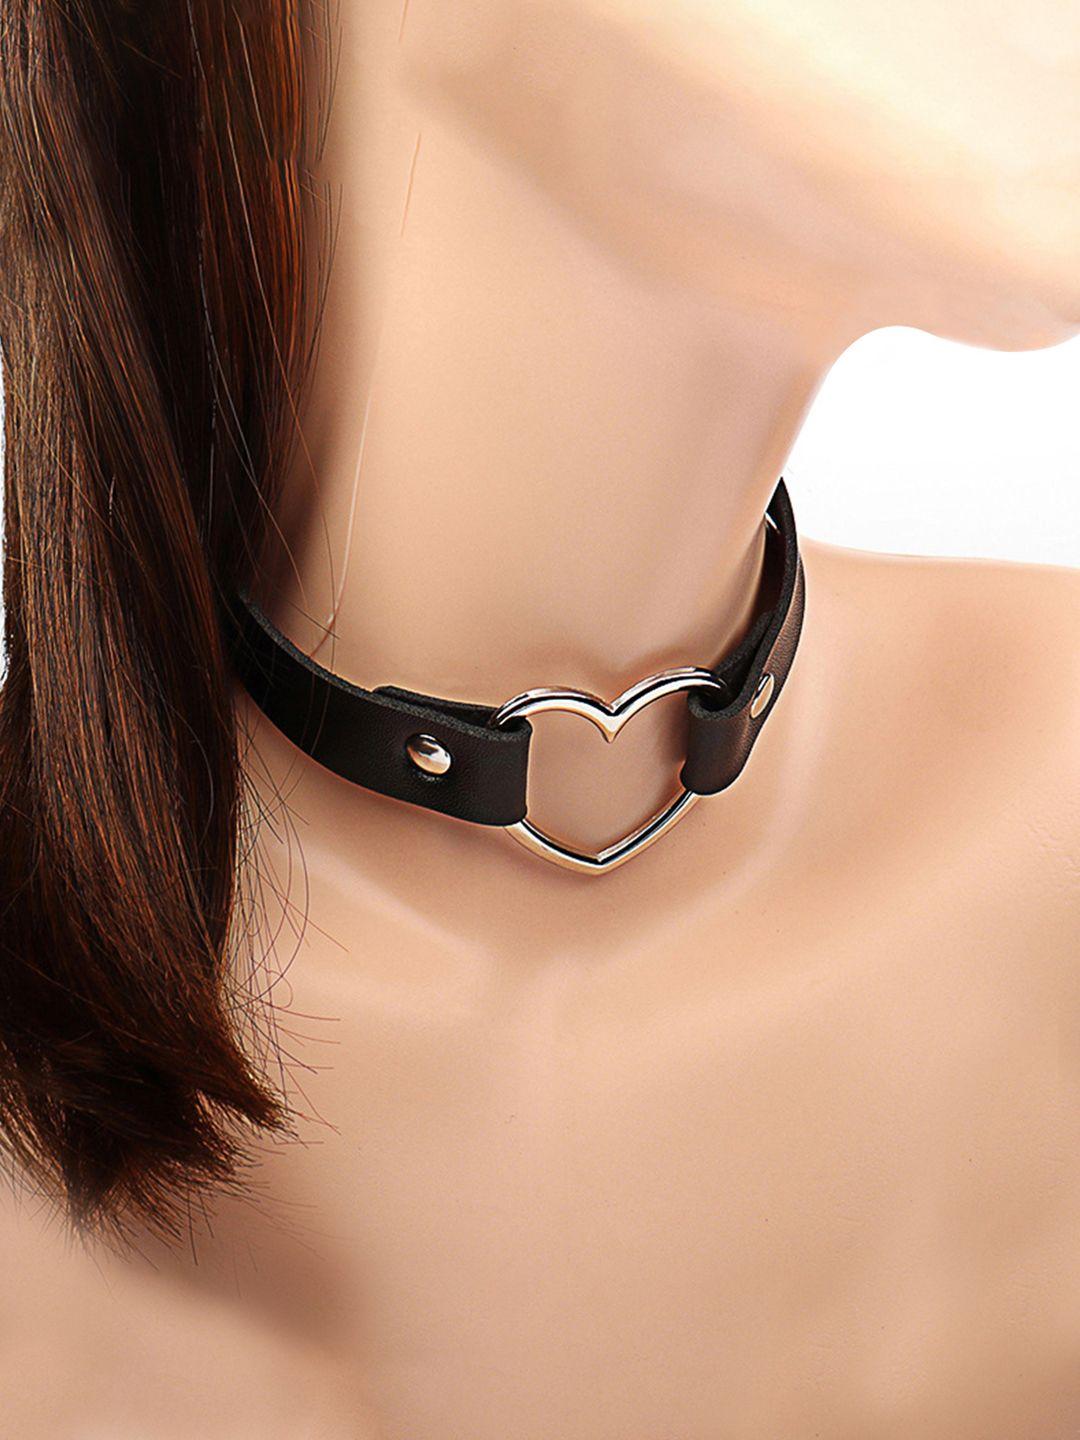 yellow chimes black adjustable pu leather choker necklace